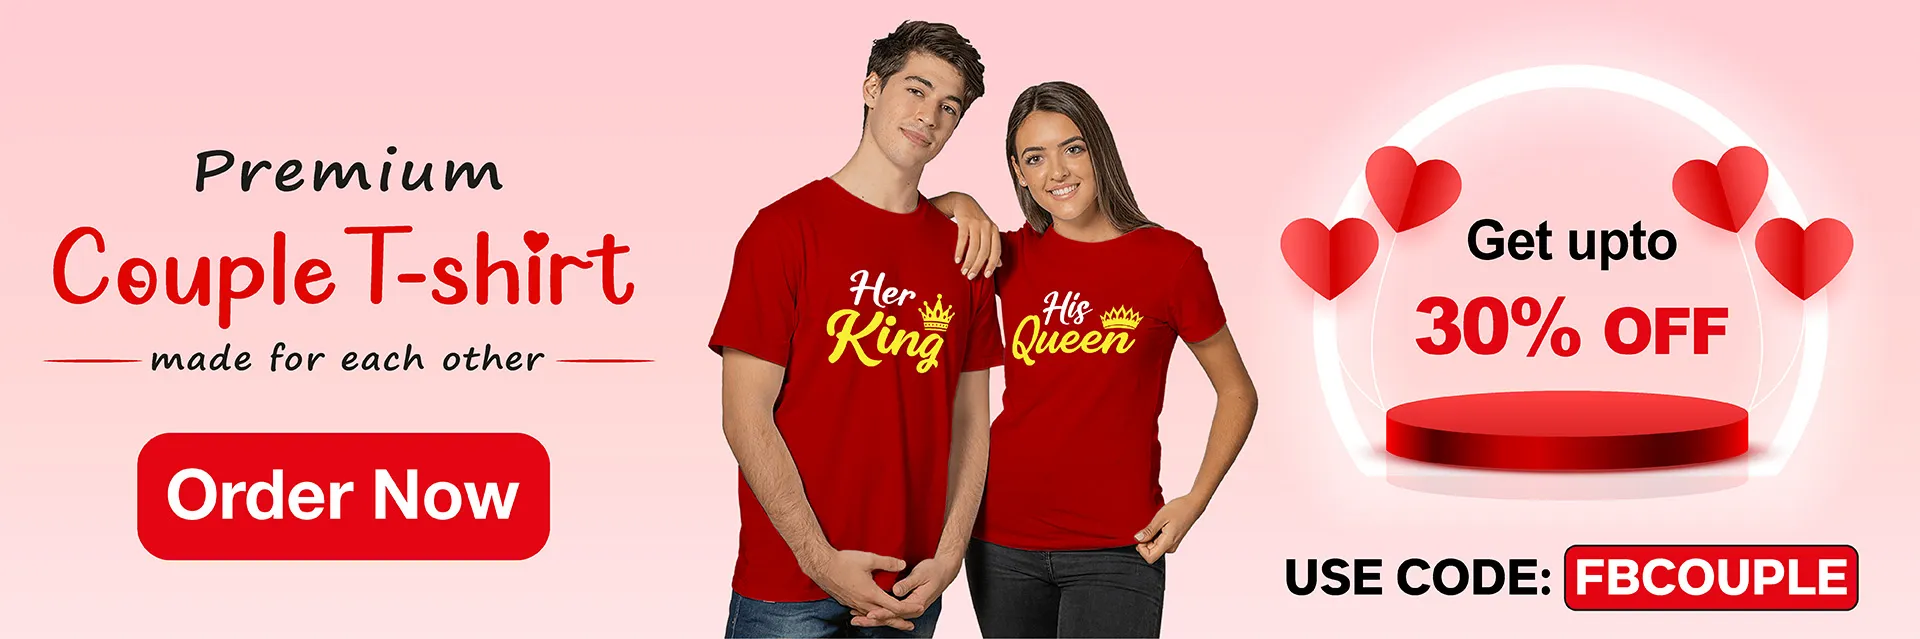 couple t shirt printing in ahmedabad india online